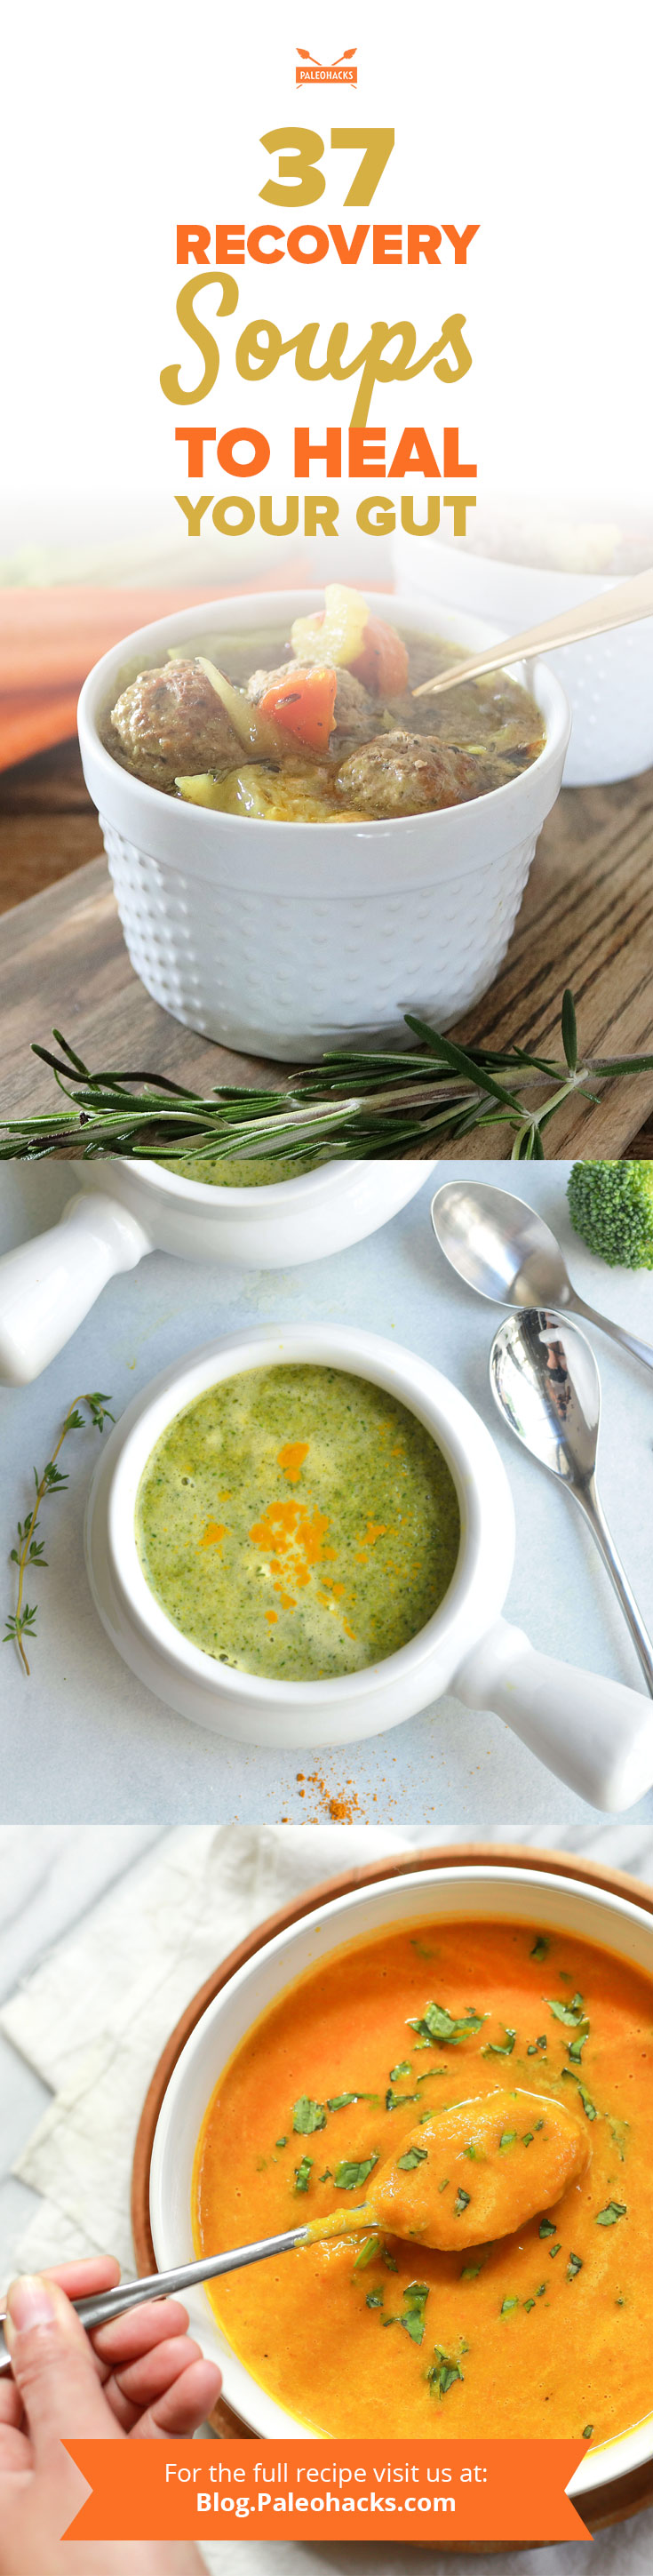 Feeling a bit under the weather? These soups - some creamy, some brothy, some savory, some sweet - will deliver the health boost your body needs.